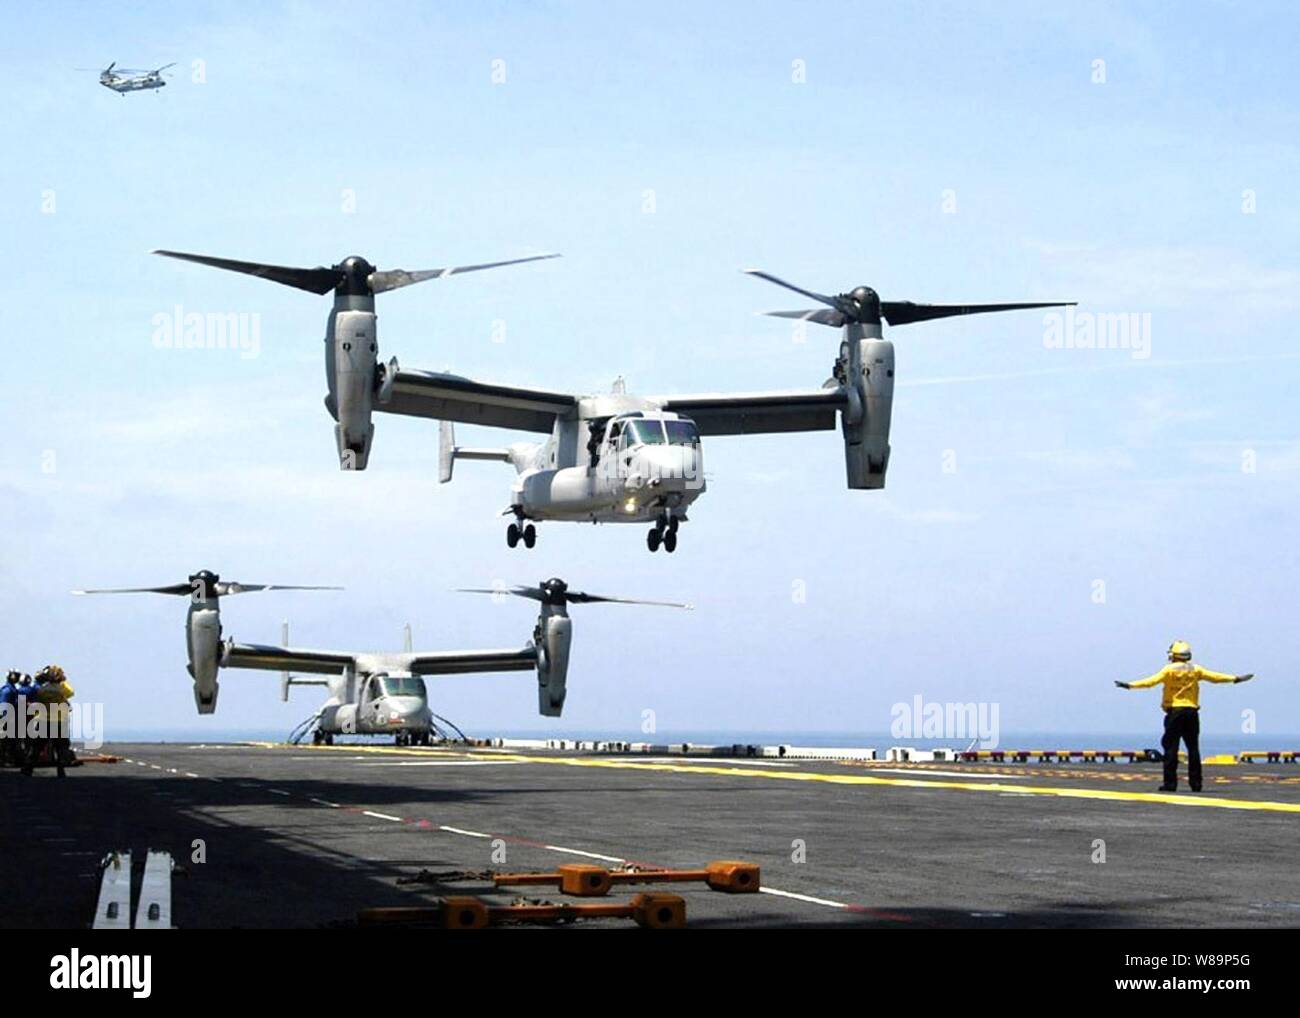 Two U.S. Navy V-22 Osprey aircraft operate from the flight deck of the USS Iwo Jima (LHD 7) during developmental testing on July 1, 2004.  The Osprey is a tilt-rotor vertical/short takeoff and landing multi-mission aircraft developed to fill joint-service, global combat operational requirements. Stock Photo